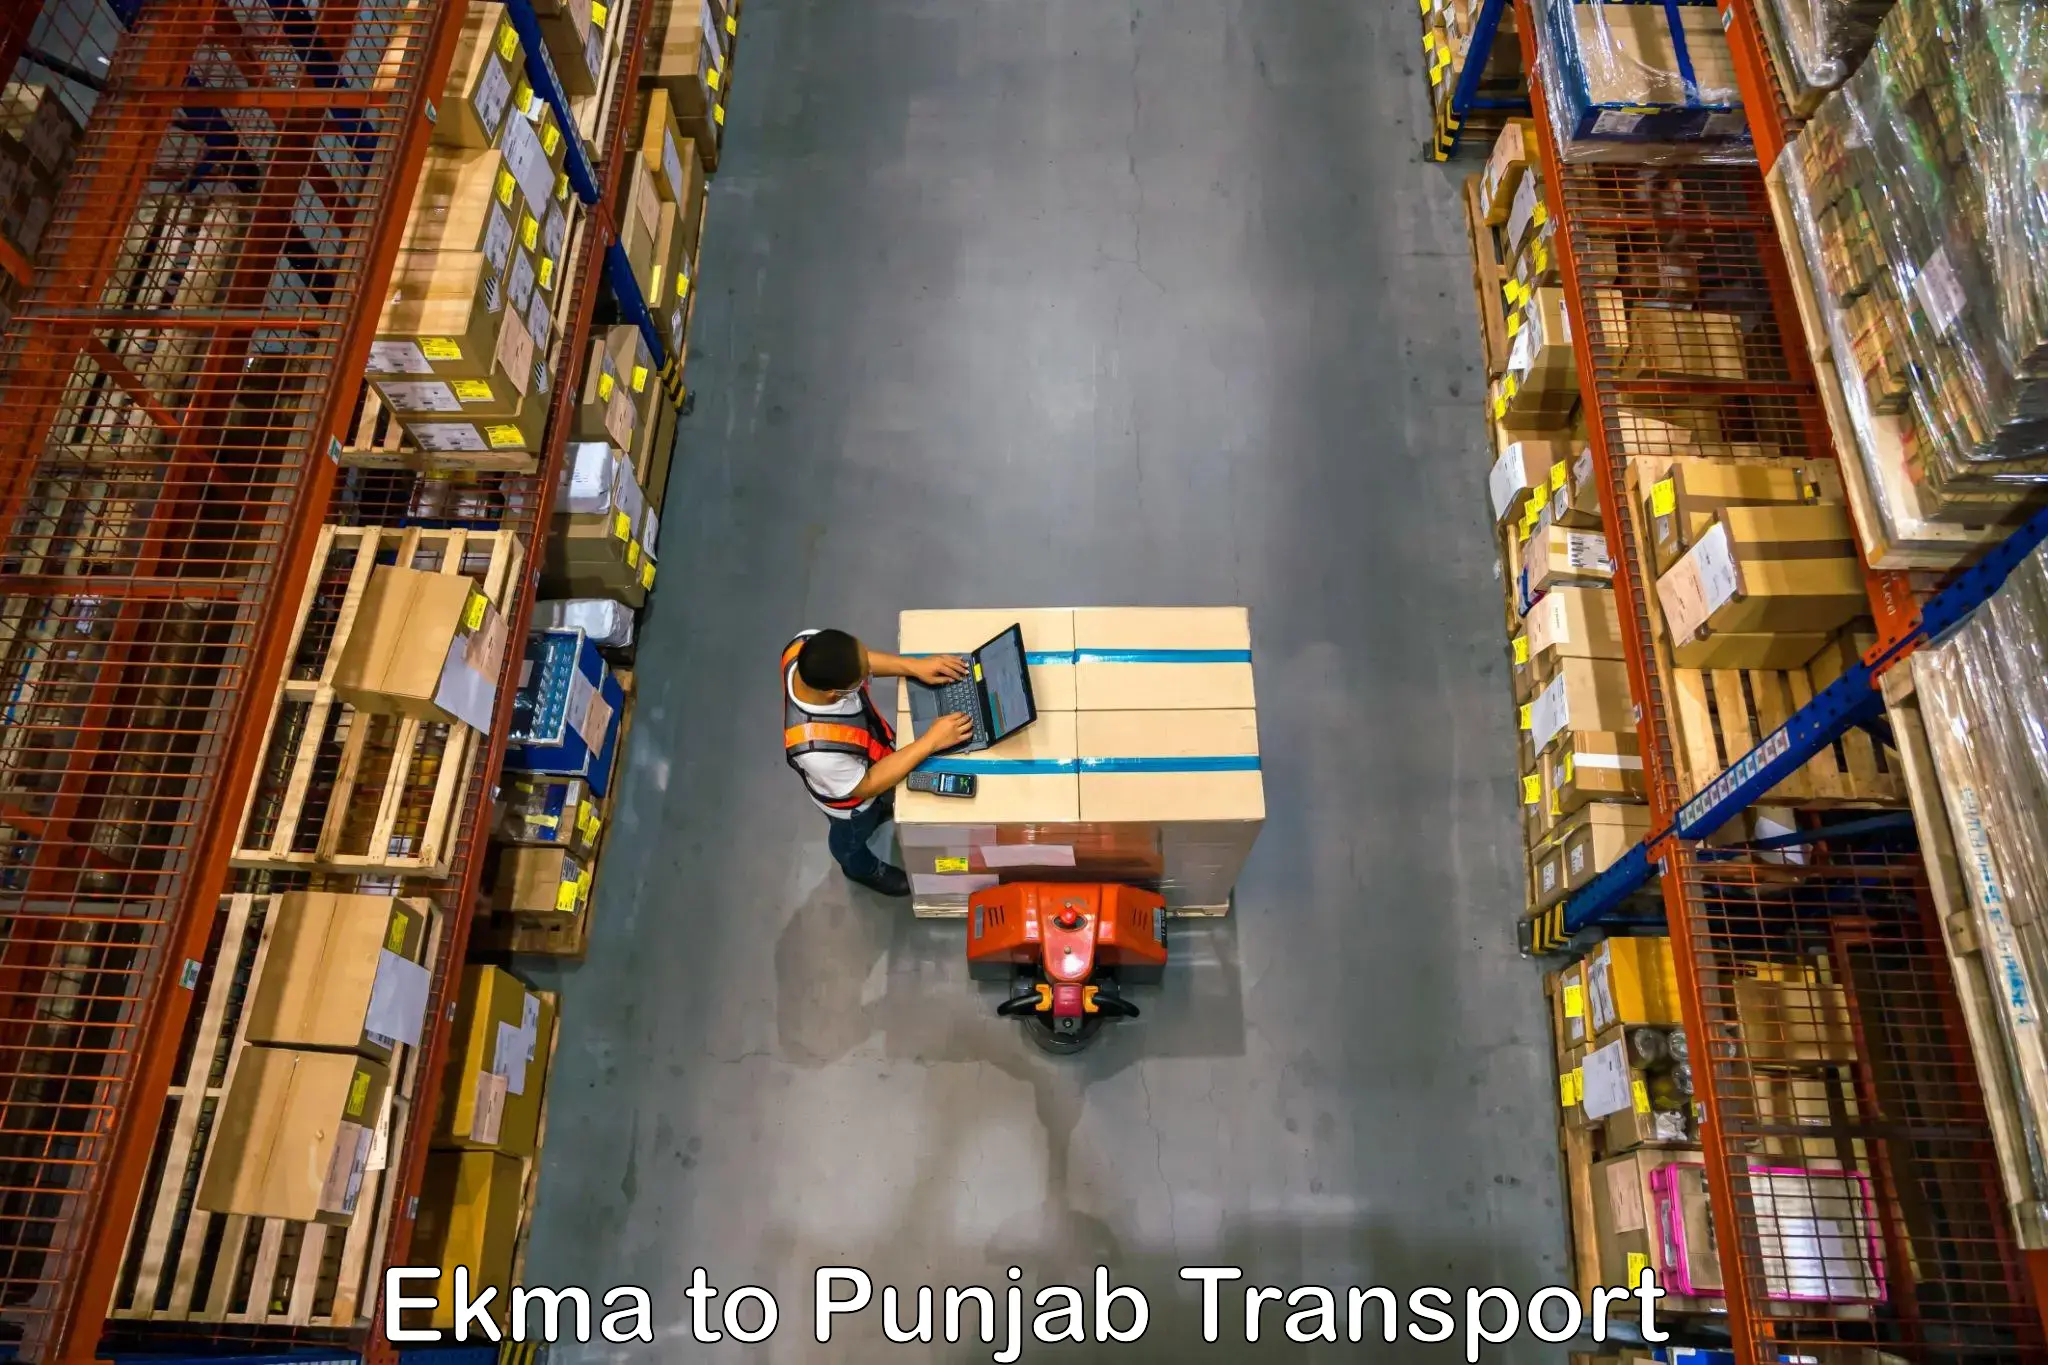 Part load transport service in India Ekma to Punjab